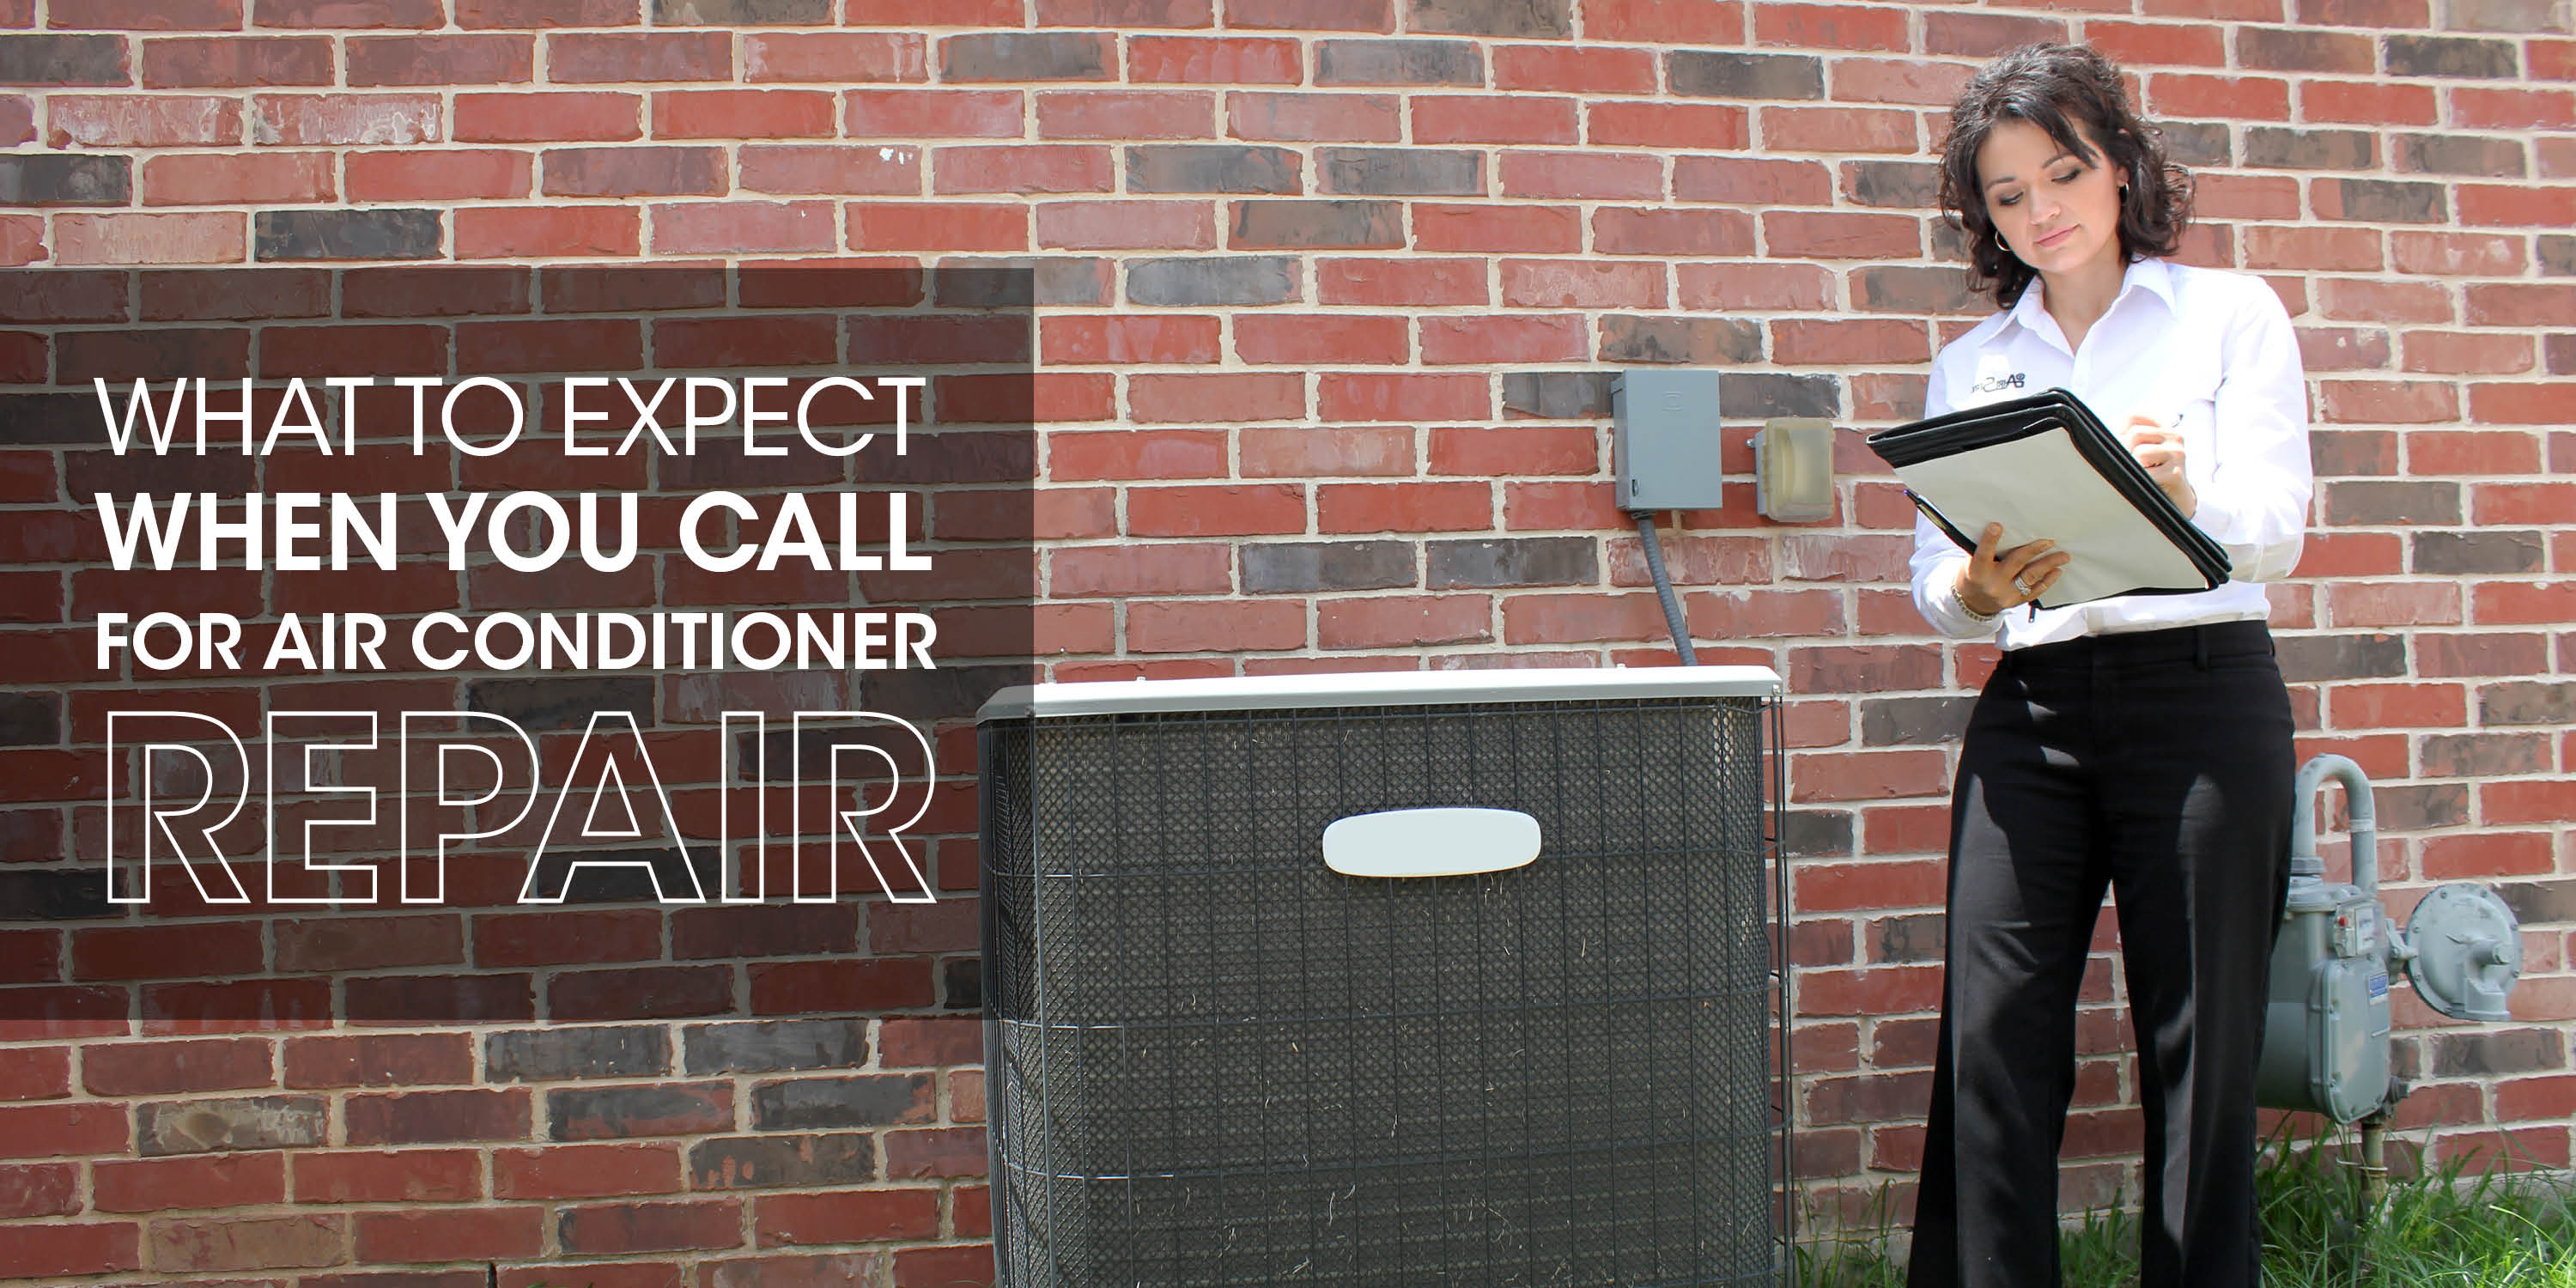 AC service company with text: "what to expect when you call for air conditioner repair"